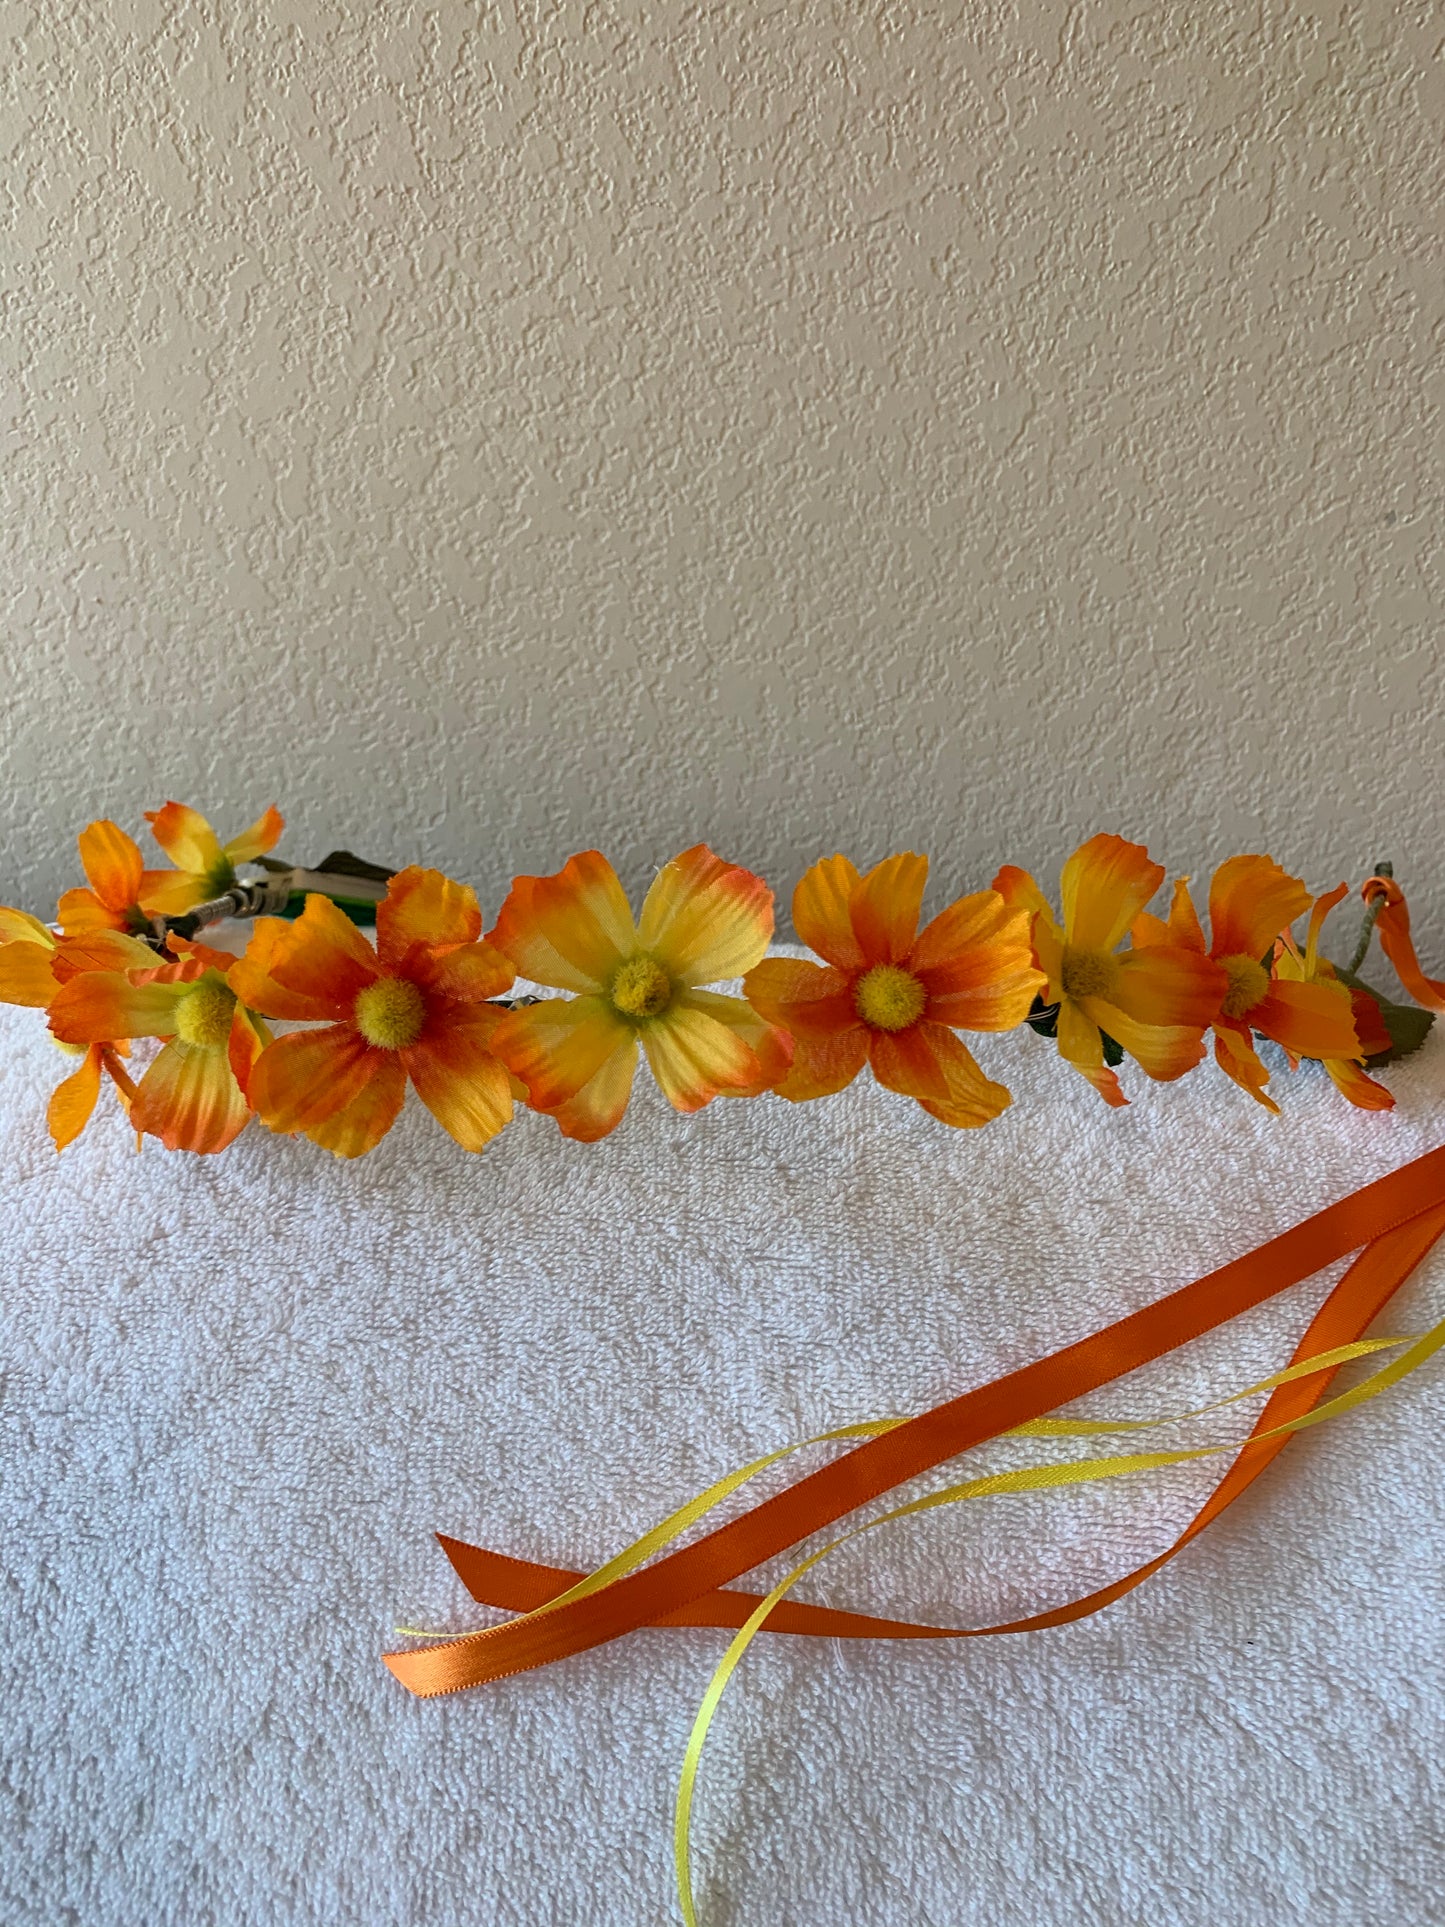 Small Wreath Lighted - Orange and Yellow Daisies